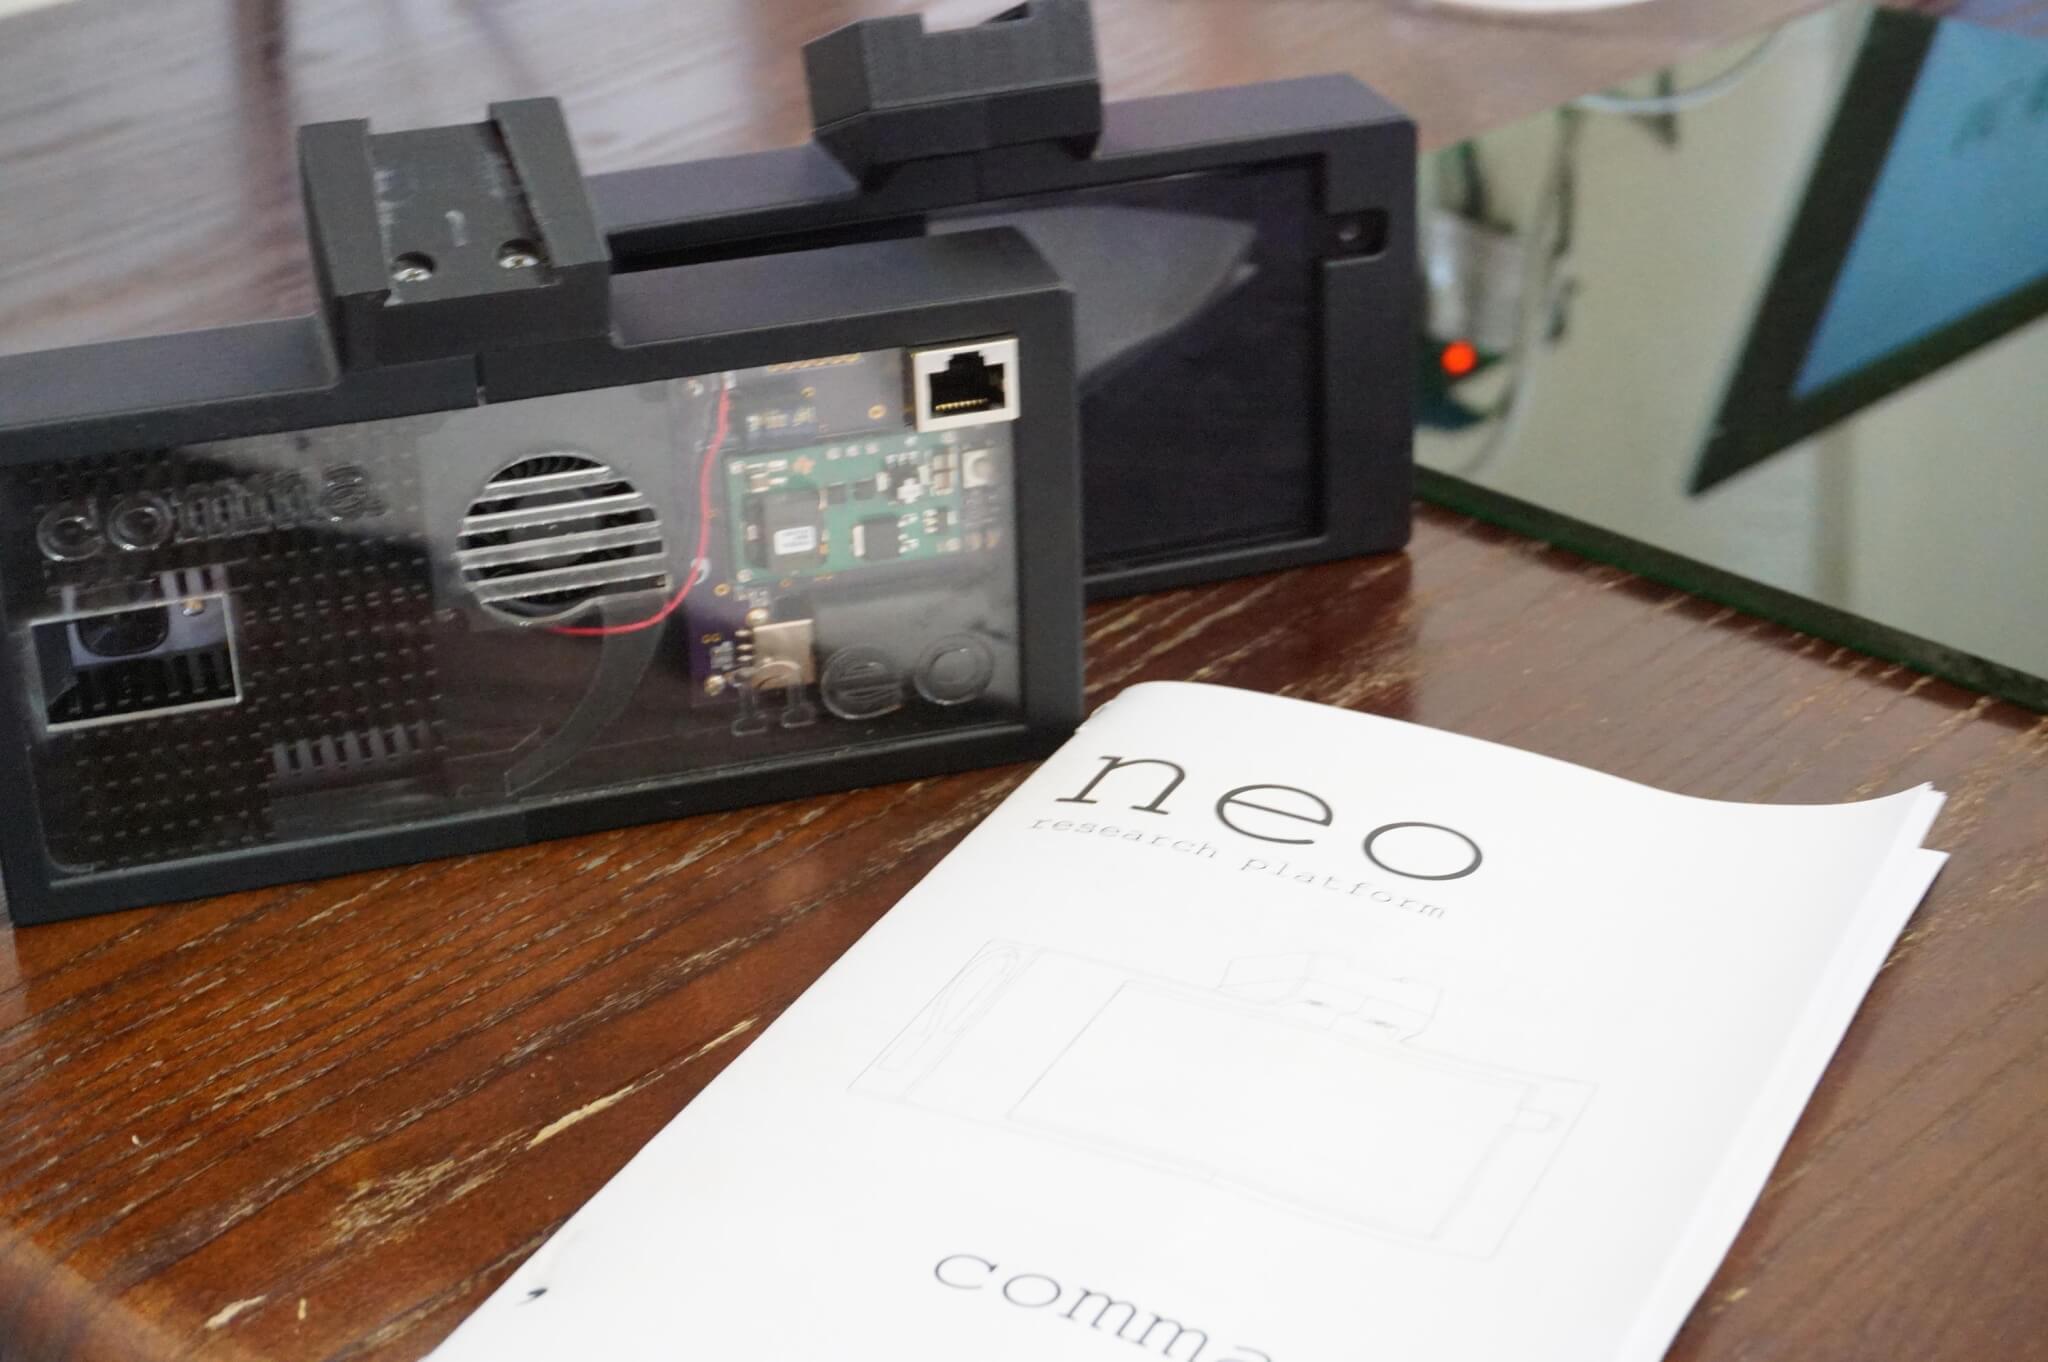 Comma.ai's new technology release: The Comma Neo, an open sourced robotics platform